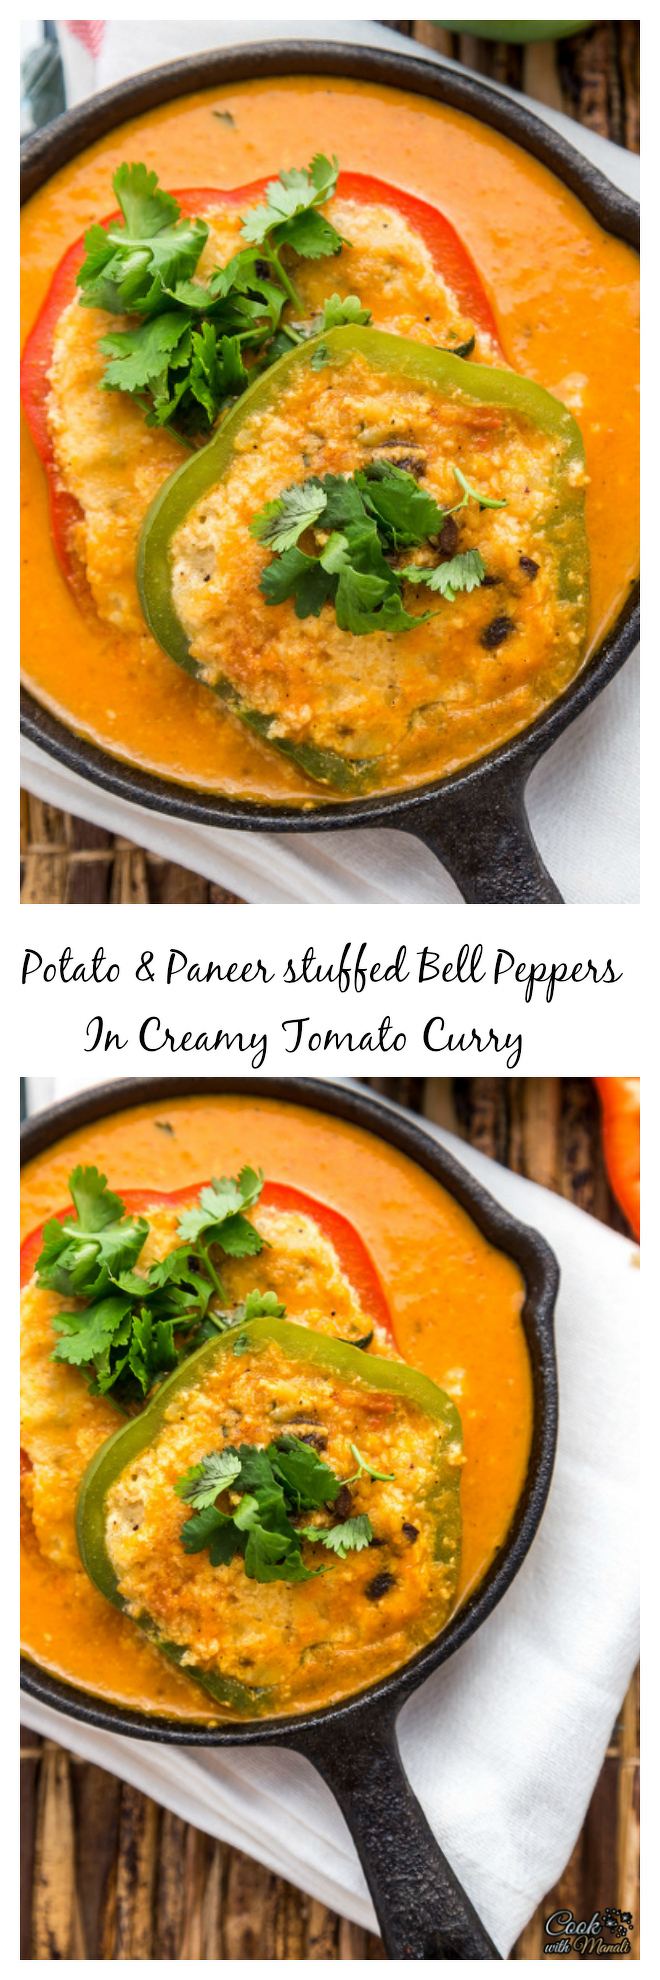 Potato-Paneer-Stuffed-Bell-Peppers-In-Tomato-Curry-Collage-nocwm